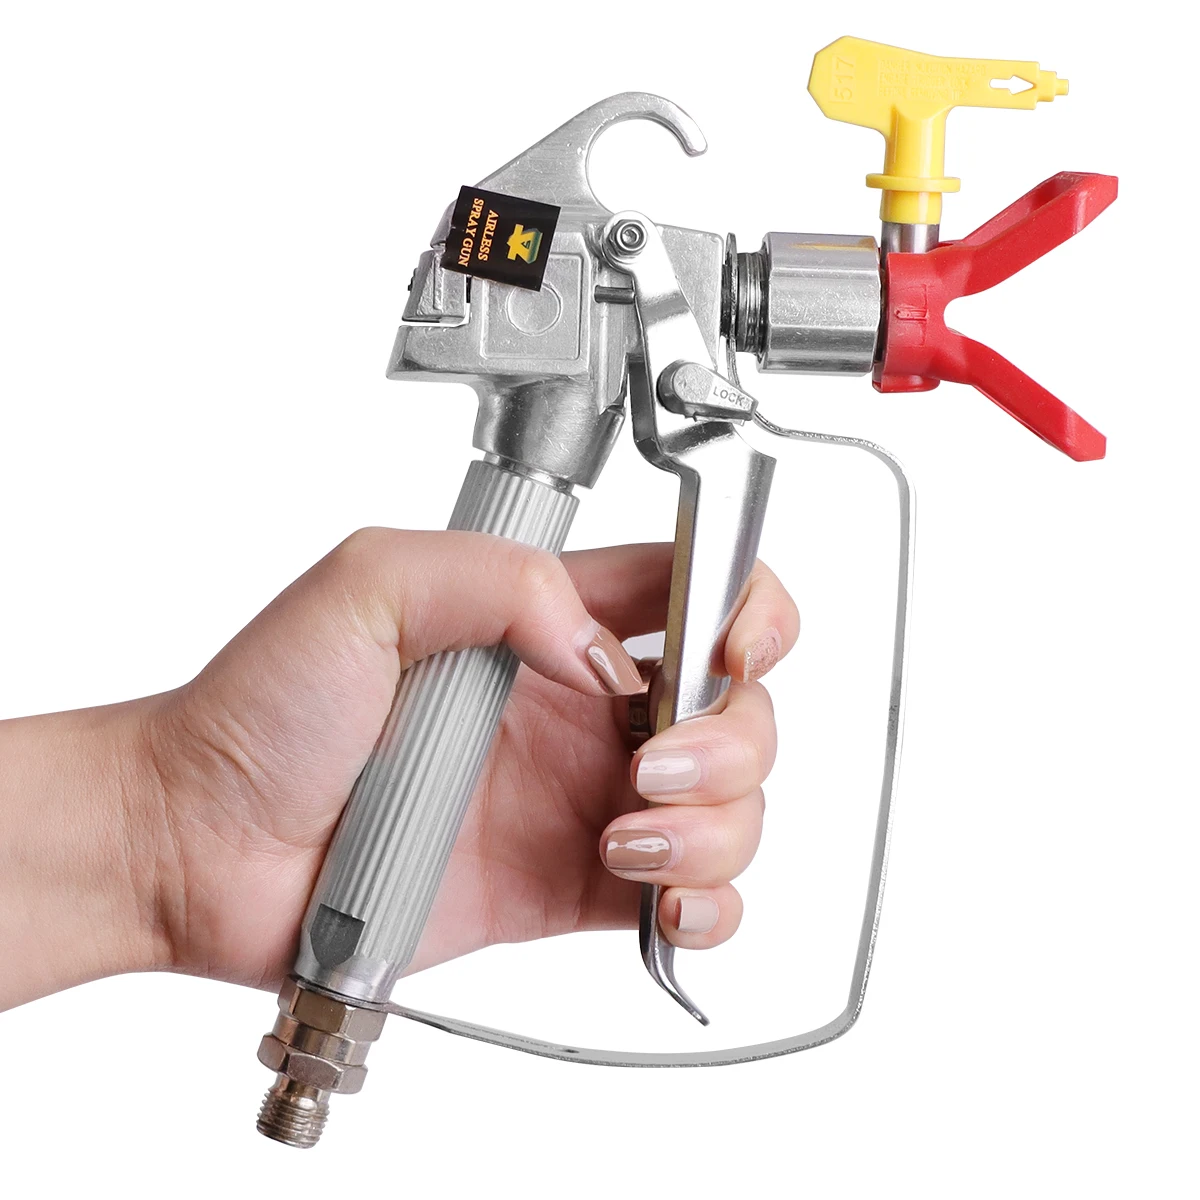 3600PSI High Pressure Airless Paint Spray Gun With 517 Tip & Nozzle Guard Pump Sprayer And Airless Spraying Machine for Wagner phendo 2 series airless tip209 235 for airless spray nozzle for wagner airless gun seat guard spray guide airless paint